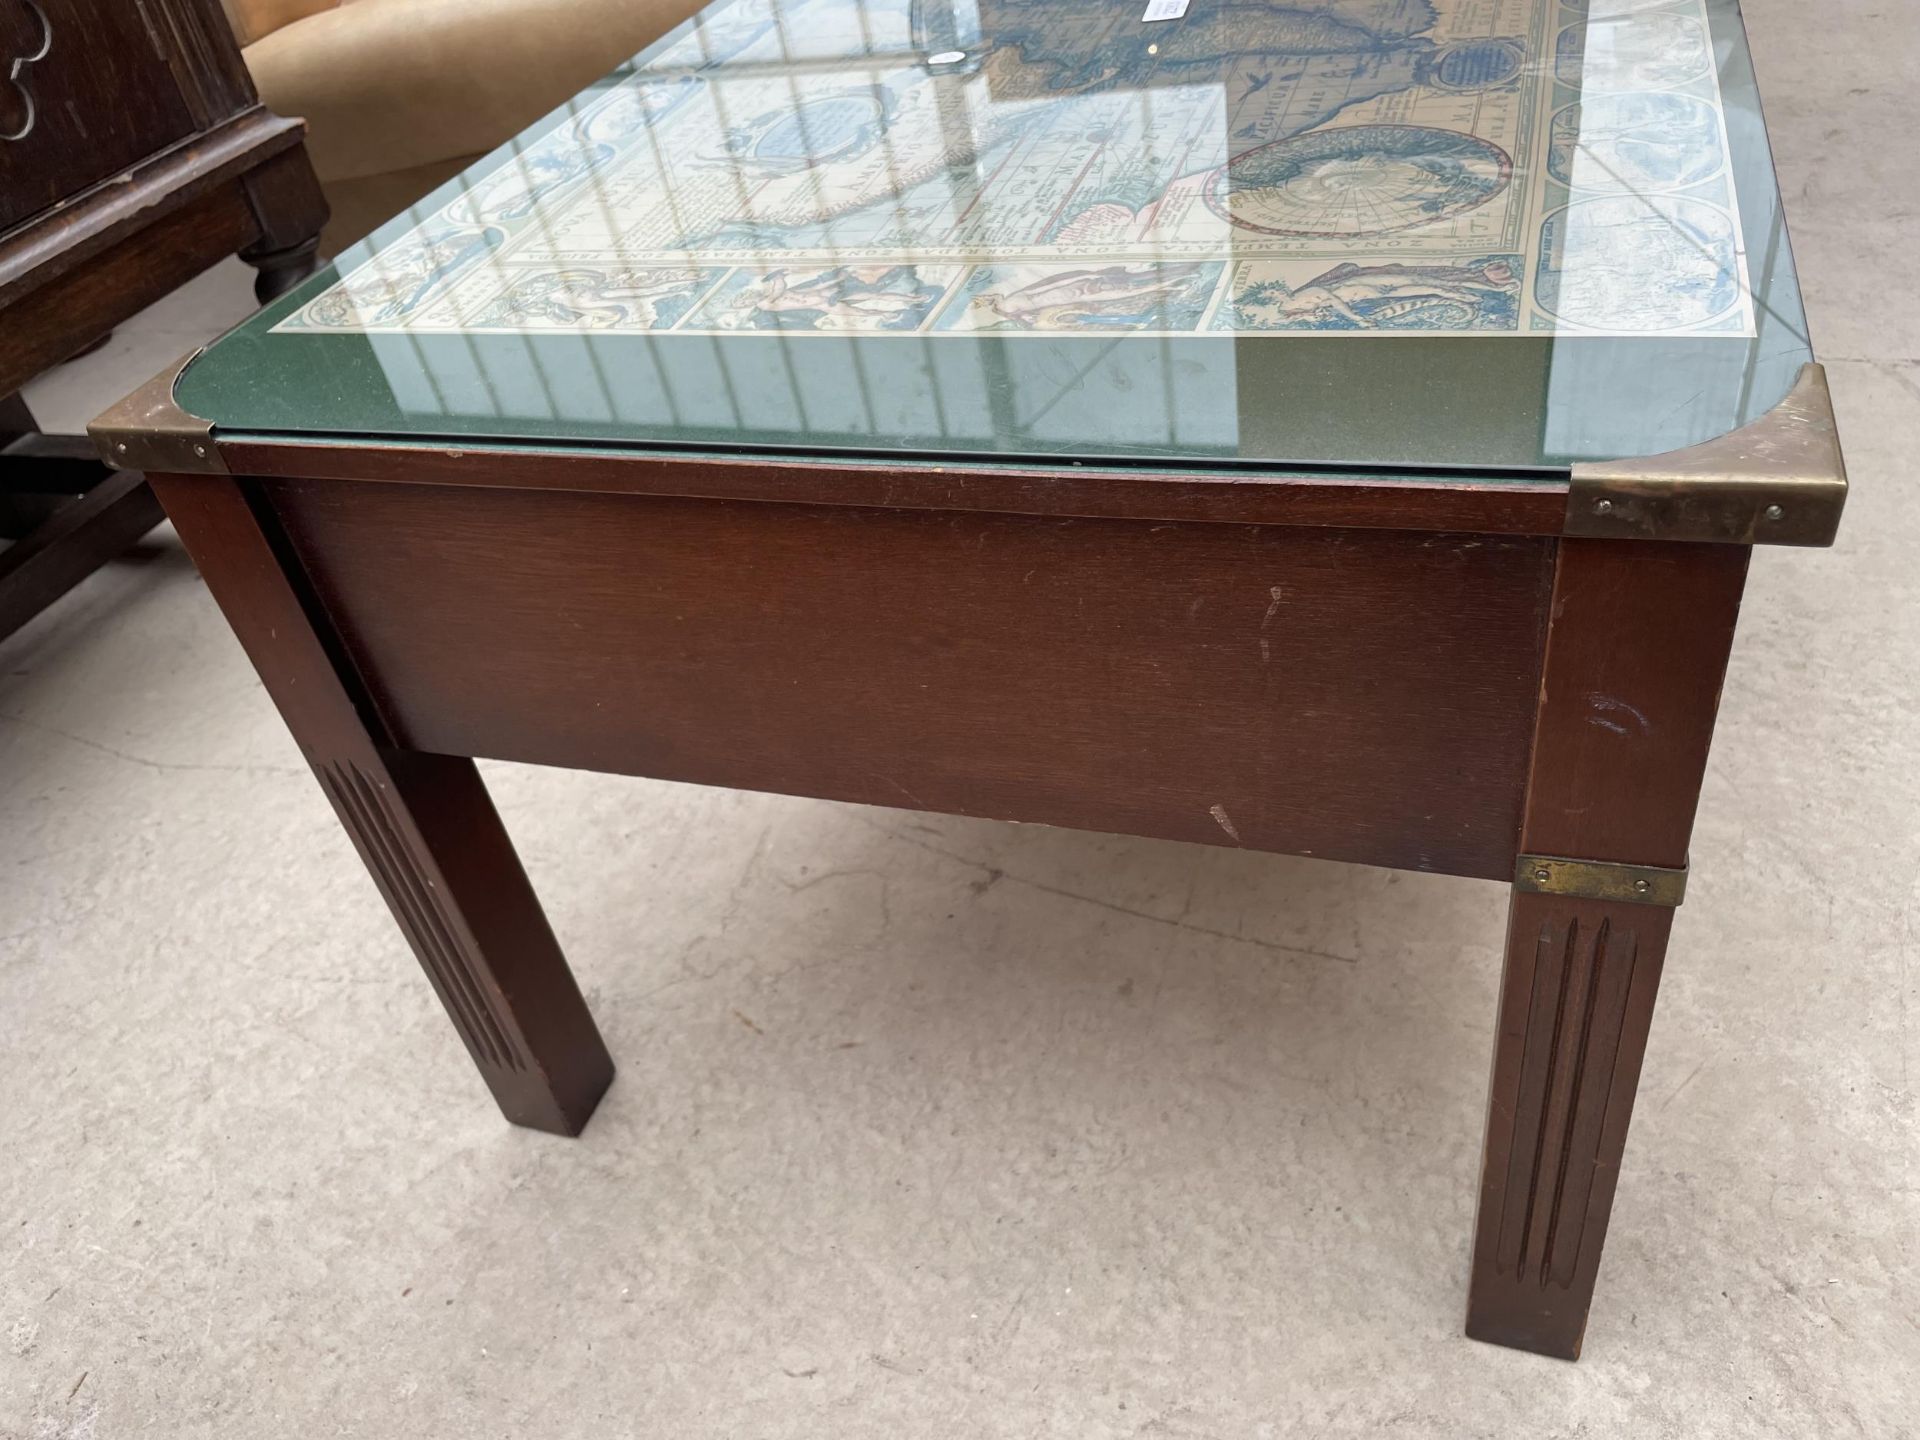 A MODERN COFFEE TABLE 36" X 24" WITH GLASS TOP COVERING ANTIQUE STYLE WORLD MAP WITH TWO DRAWERS - Image 4 of 4